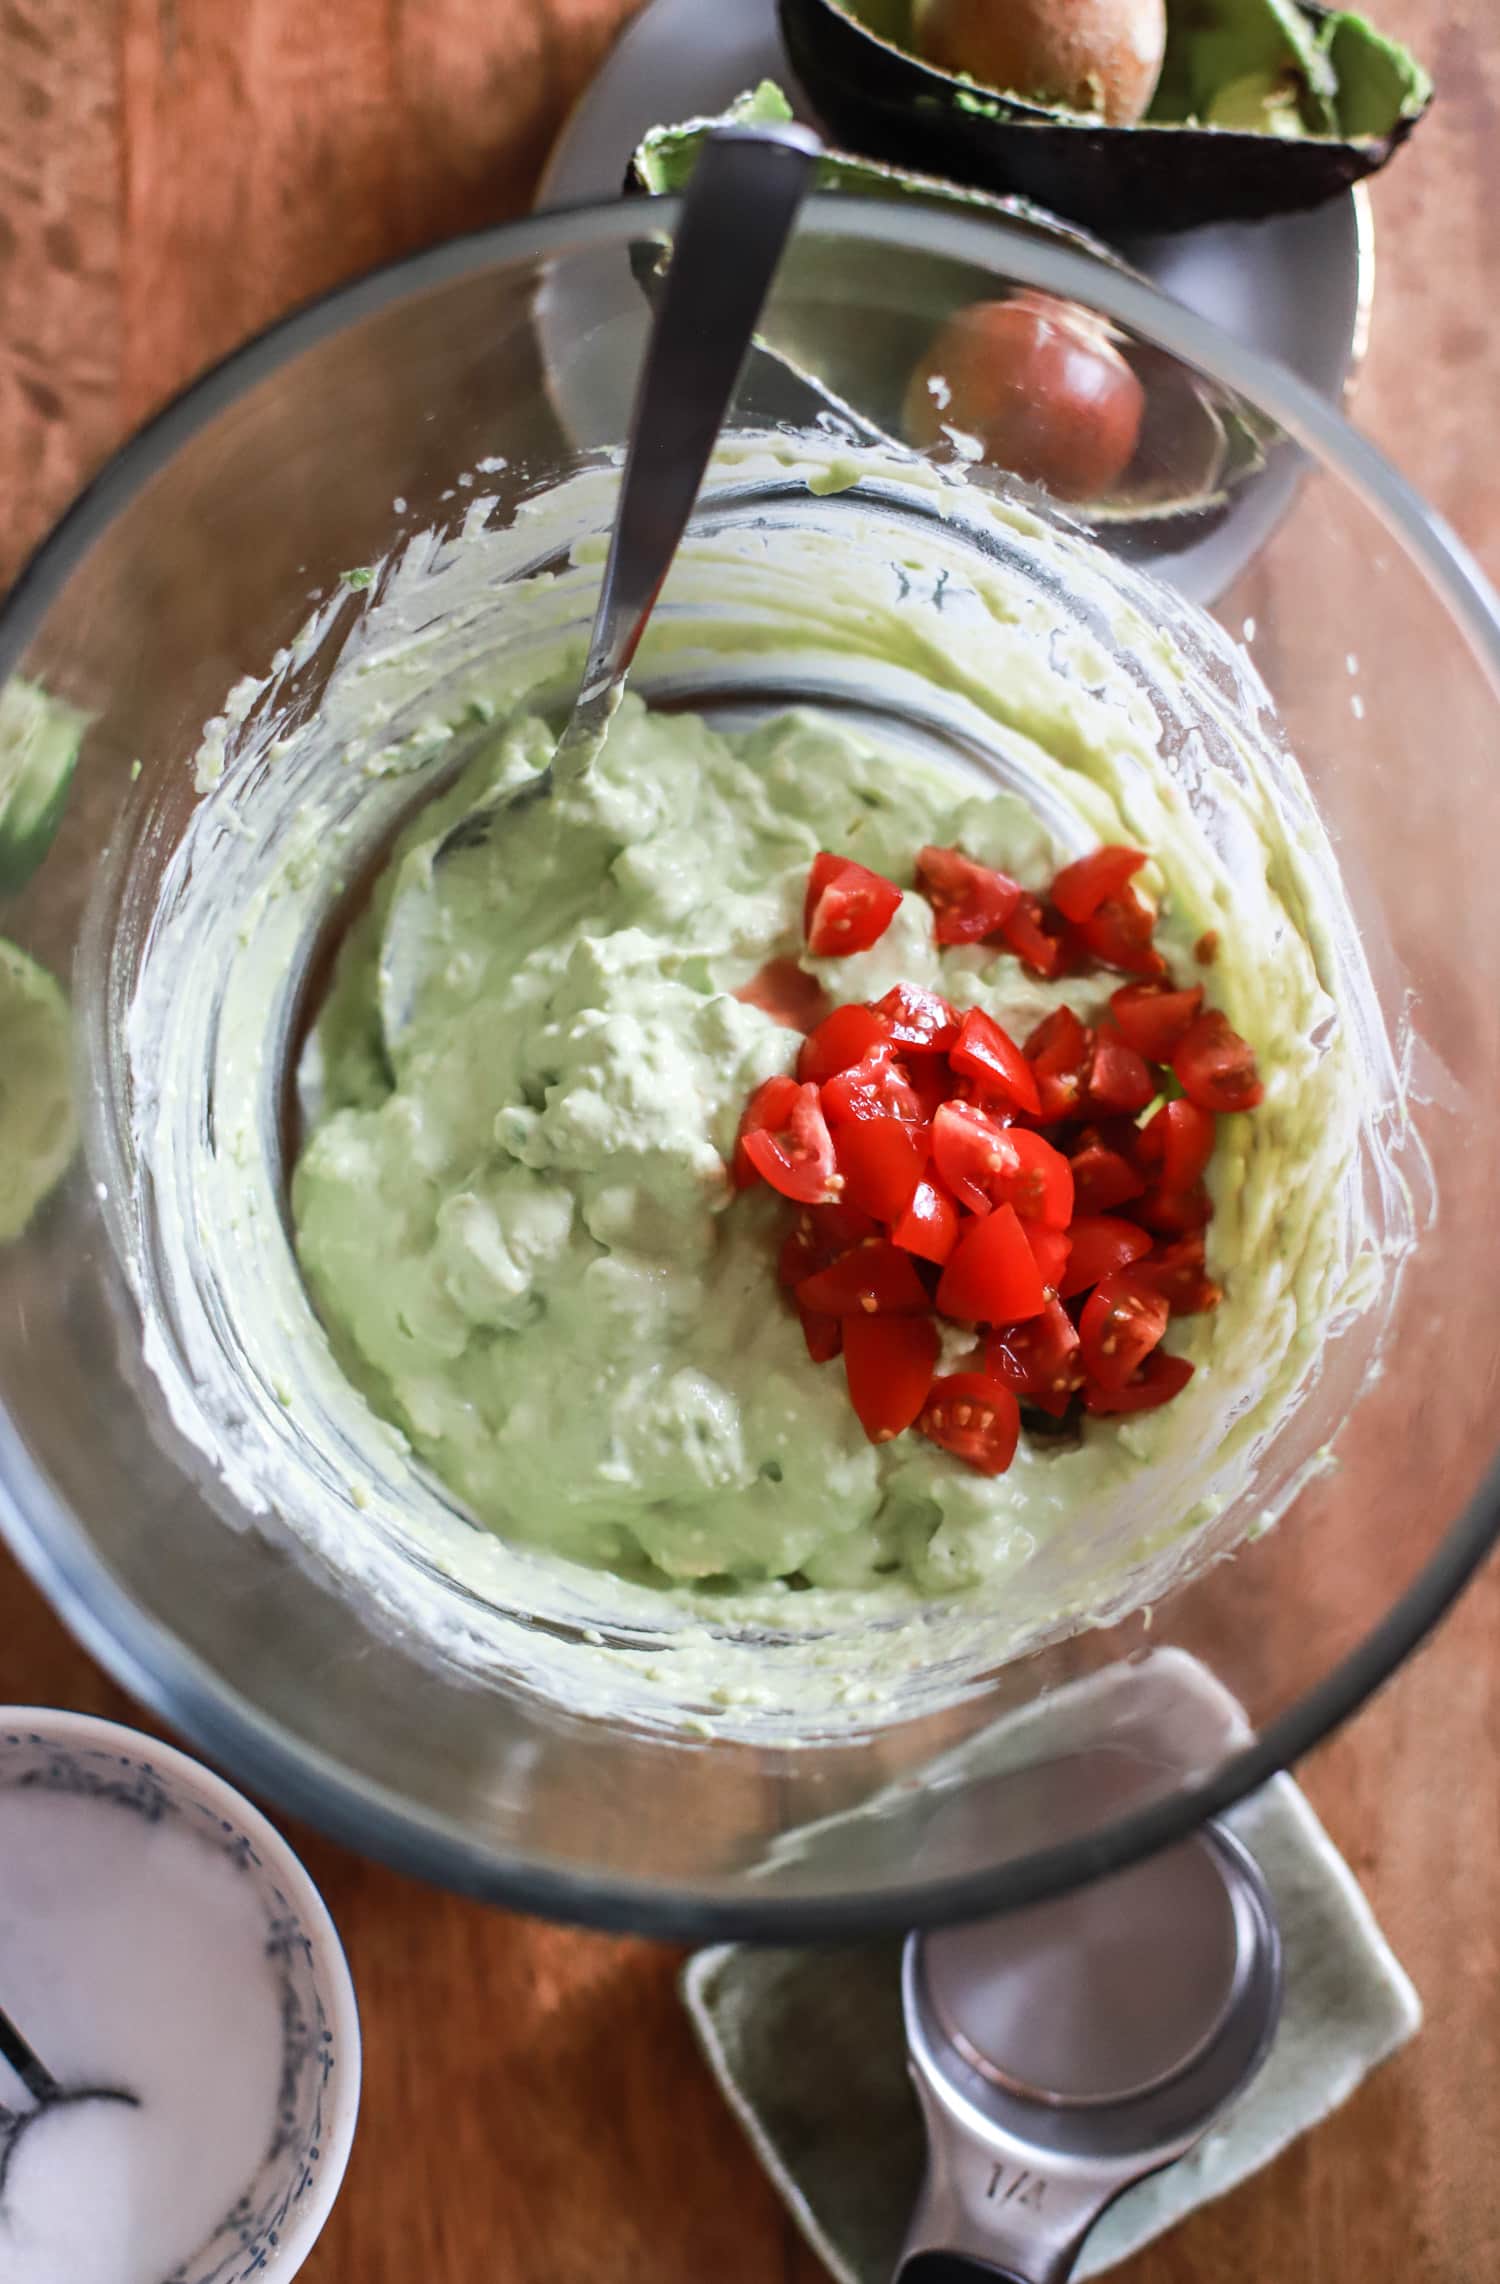 Tomatoes Added To Sour Cream Guacamole